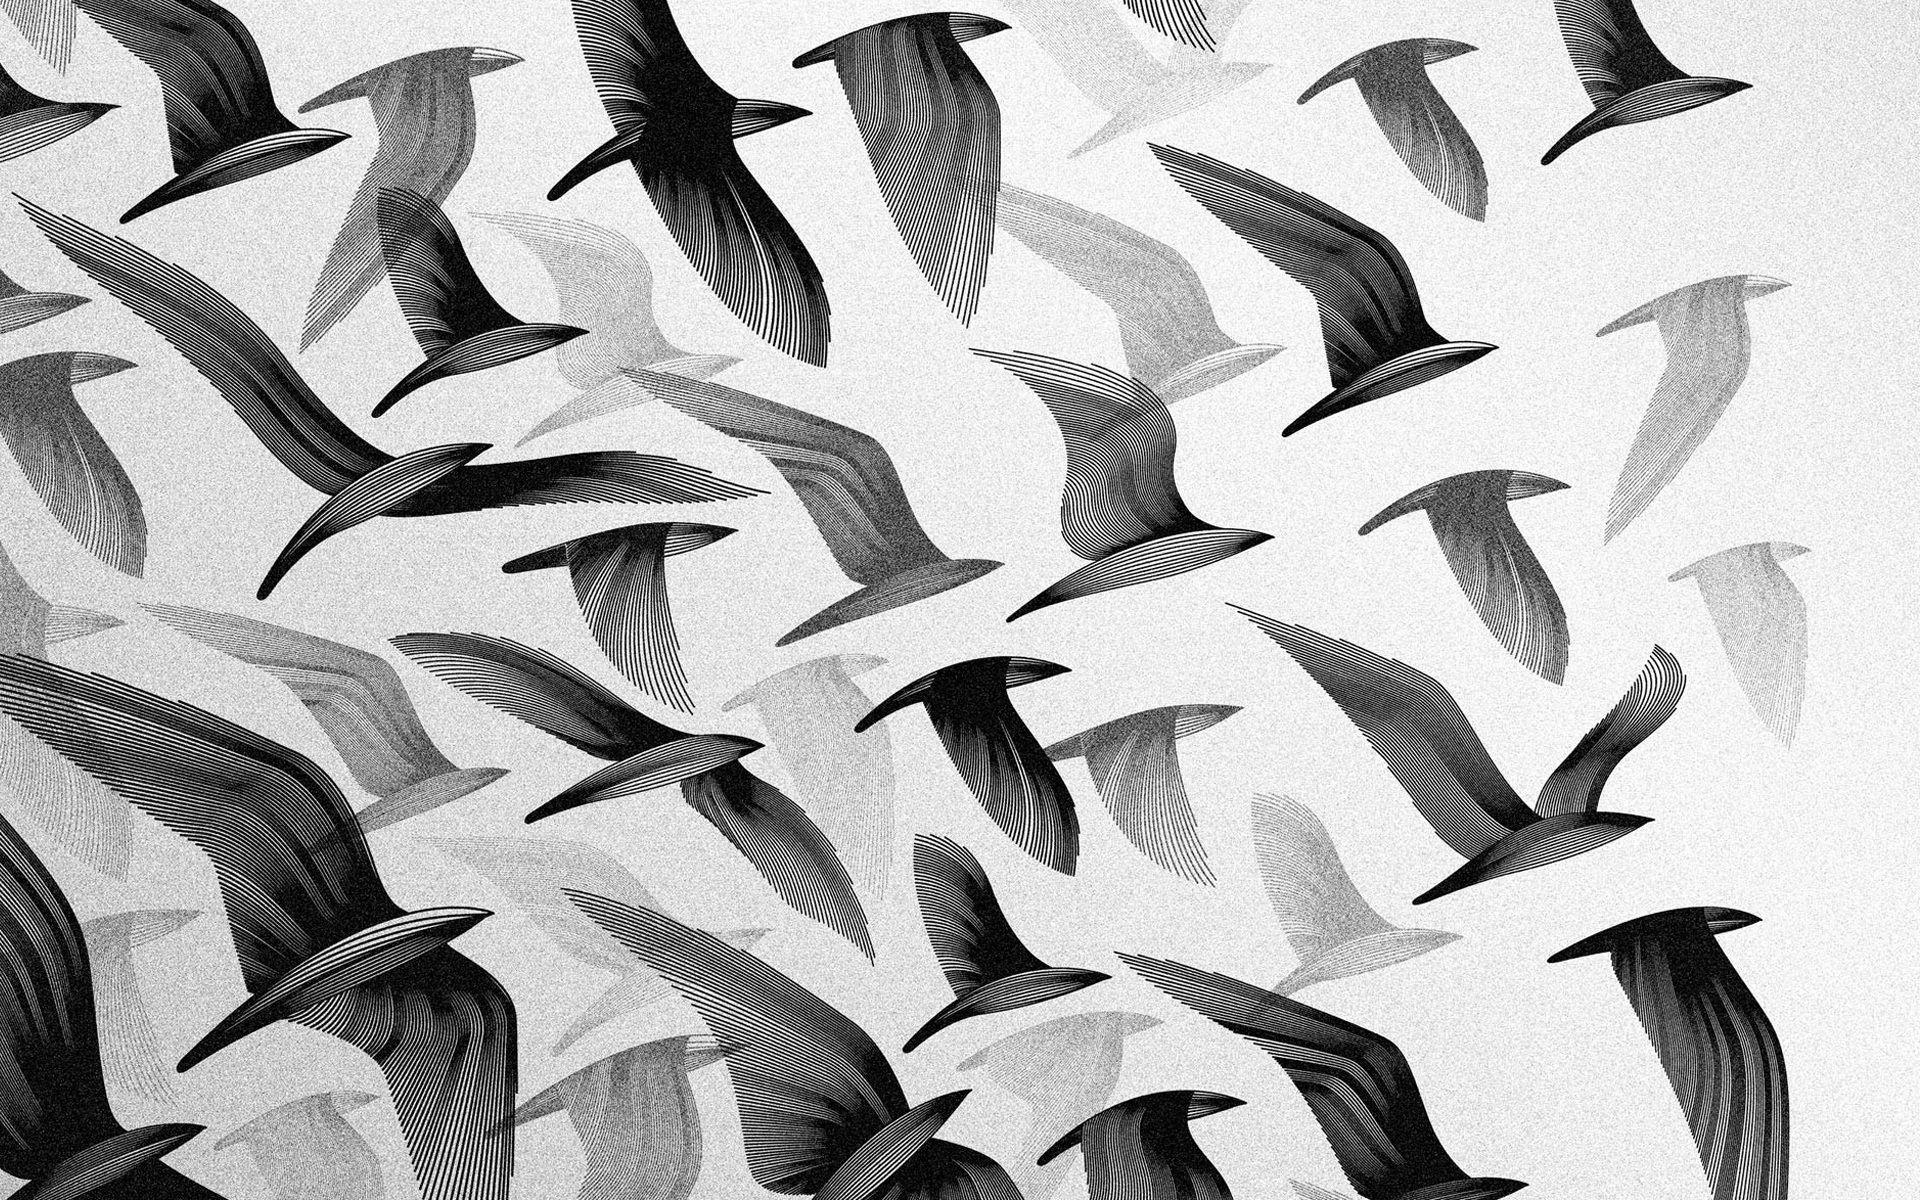 Abstract Birds Wallpapers - Top Free Abstract Birds Backgrounds